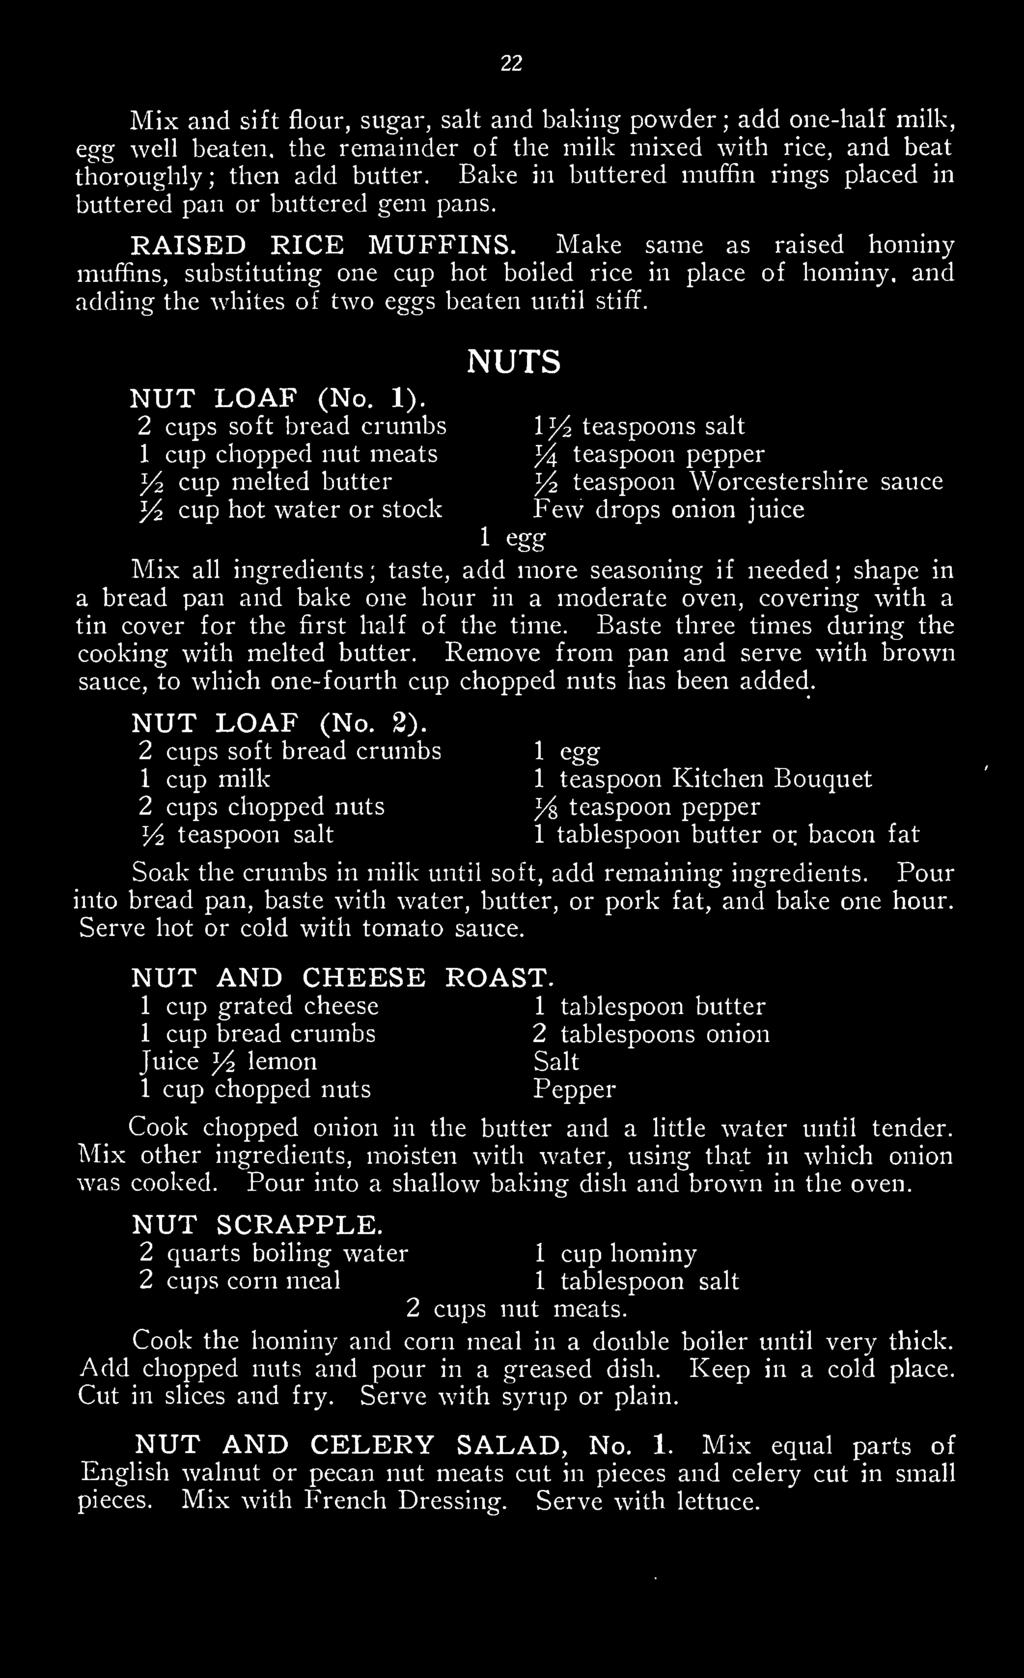 Make same as raised hominy muffins, substituting one cup hot boiled rice in place of hominy, and adding the whites of two eggs beaten until stiff. NUTS NUT LOAF (No. 1).